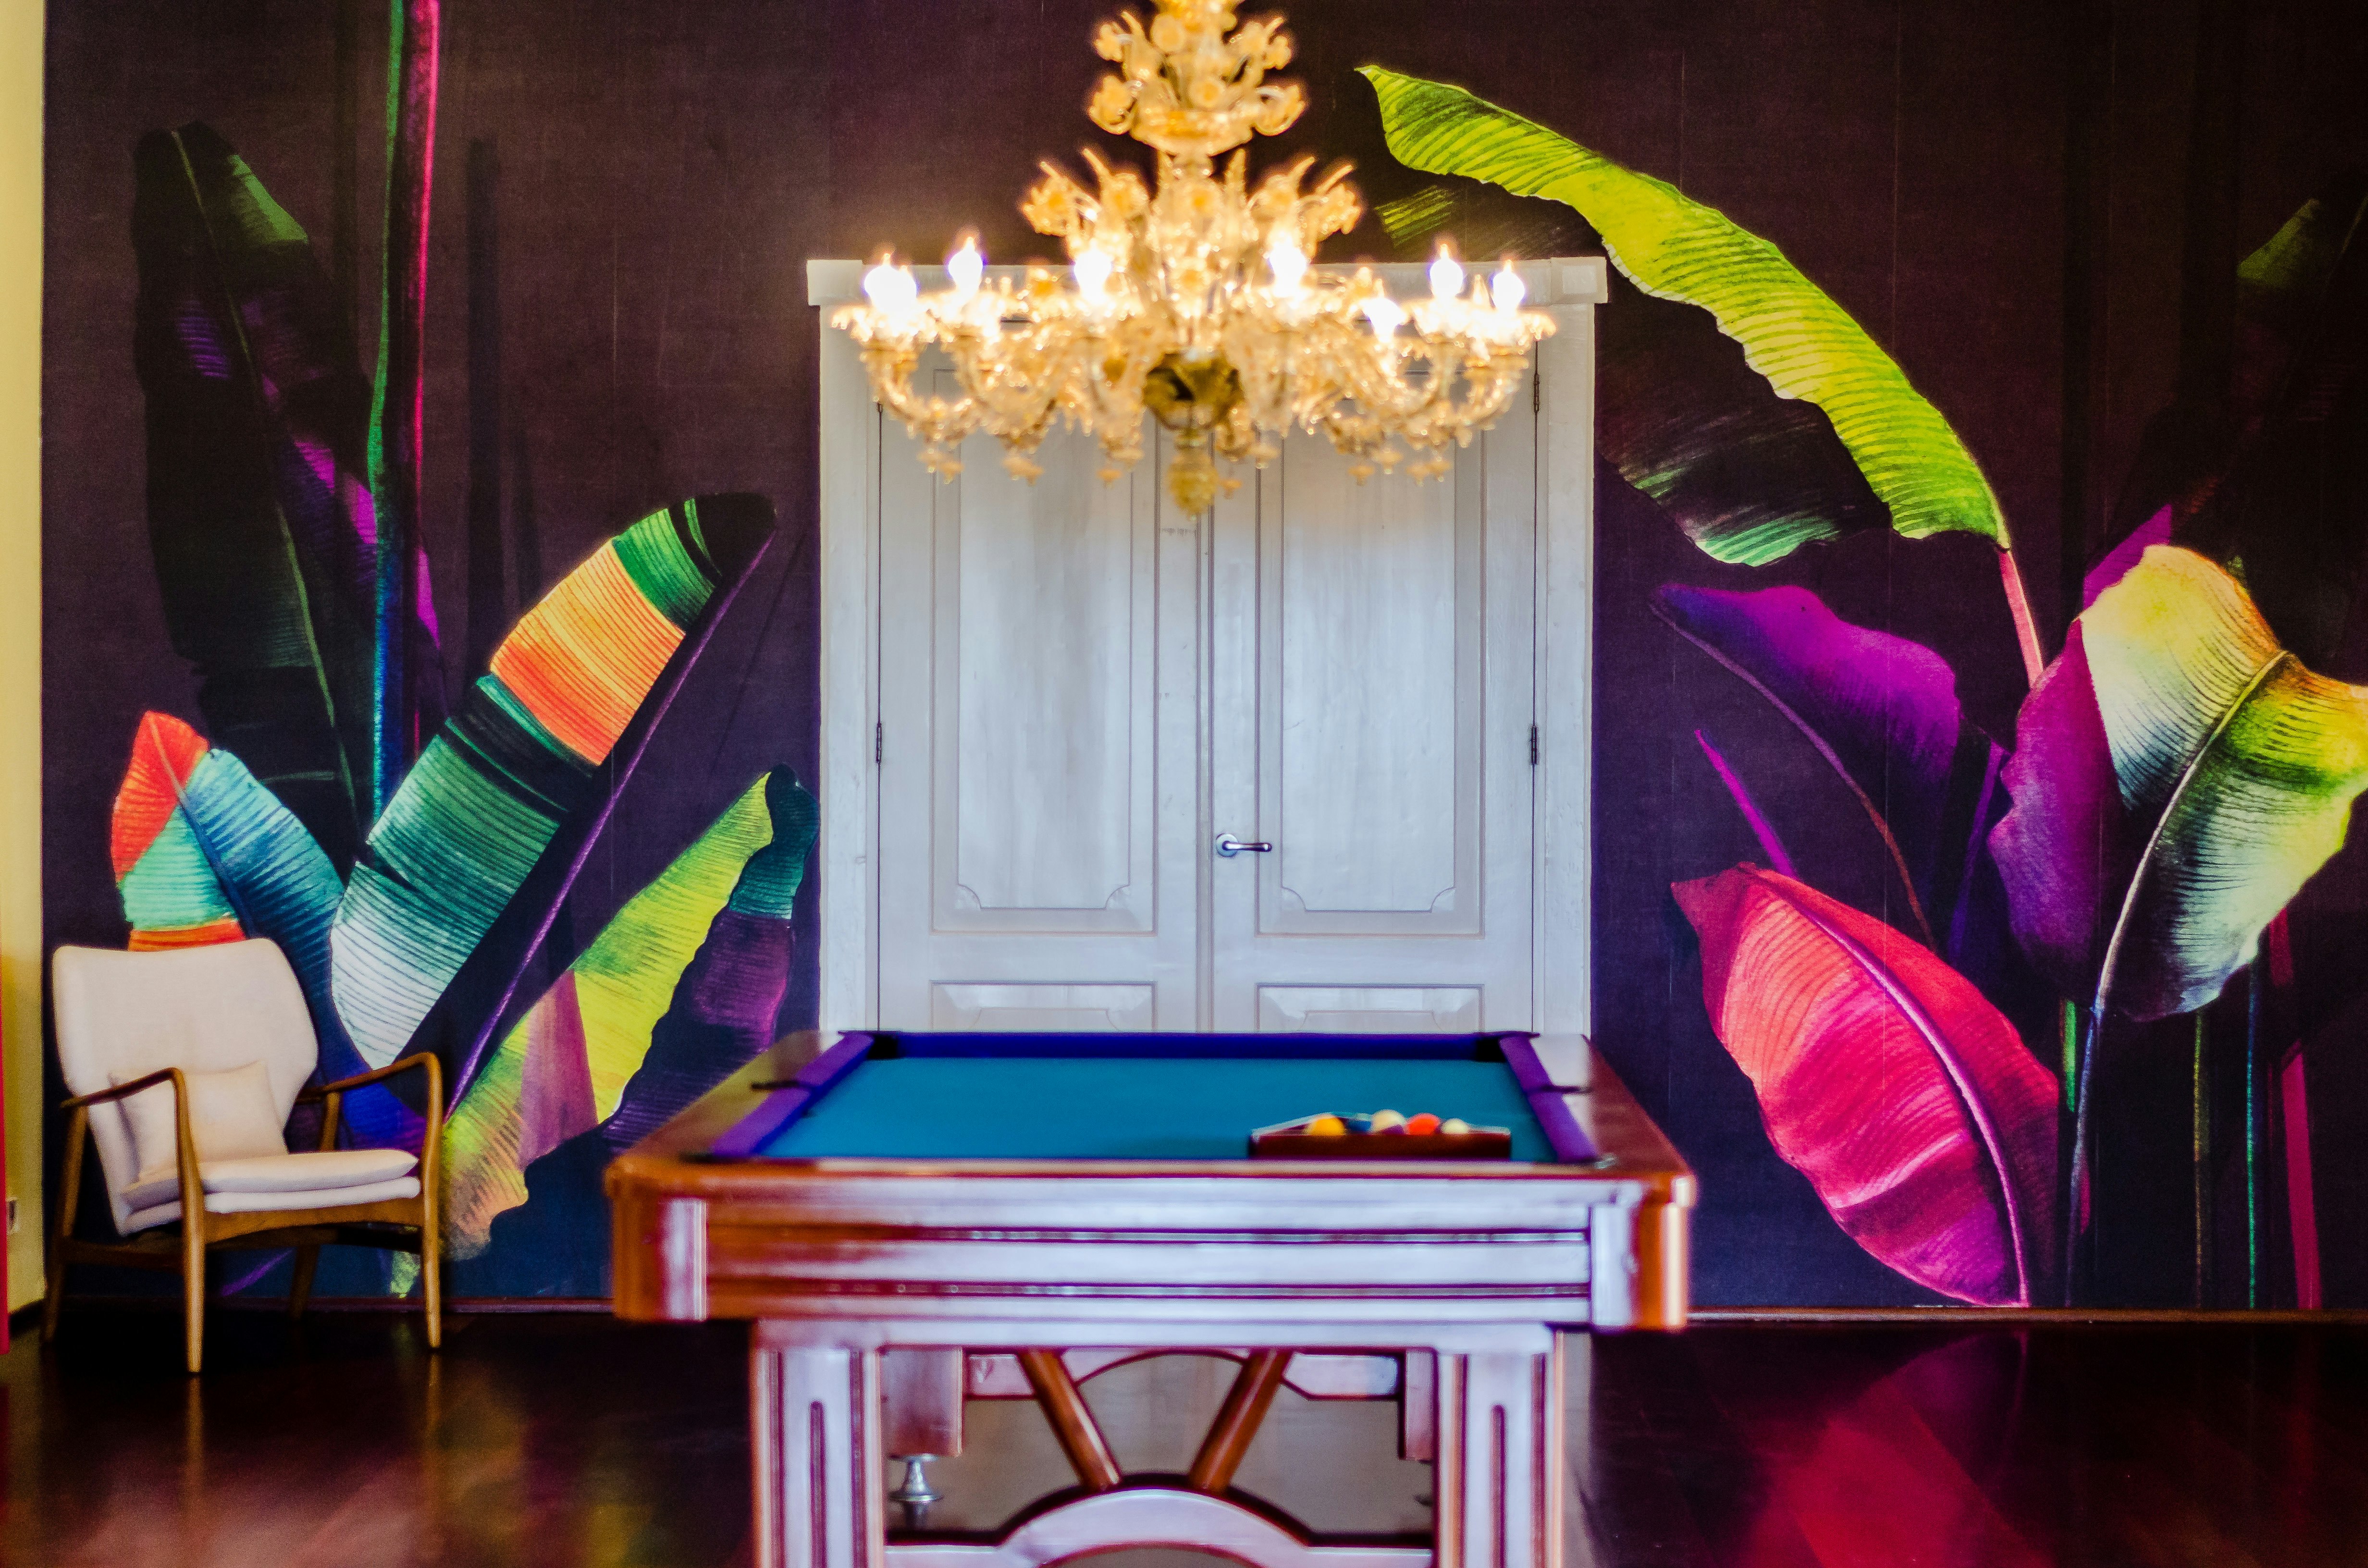 A pool table sits under a crystal chandelier in front of a deep purple wall decorated with a colorful illustration of tropical plants. A white midcentury modern chair sits in the corner and white French doors sit at the far end of the pool table